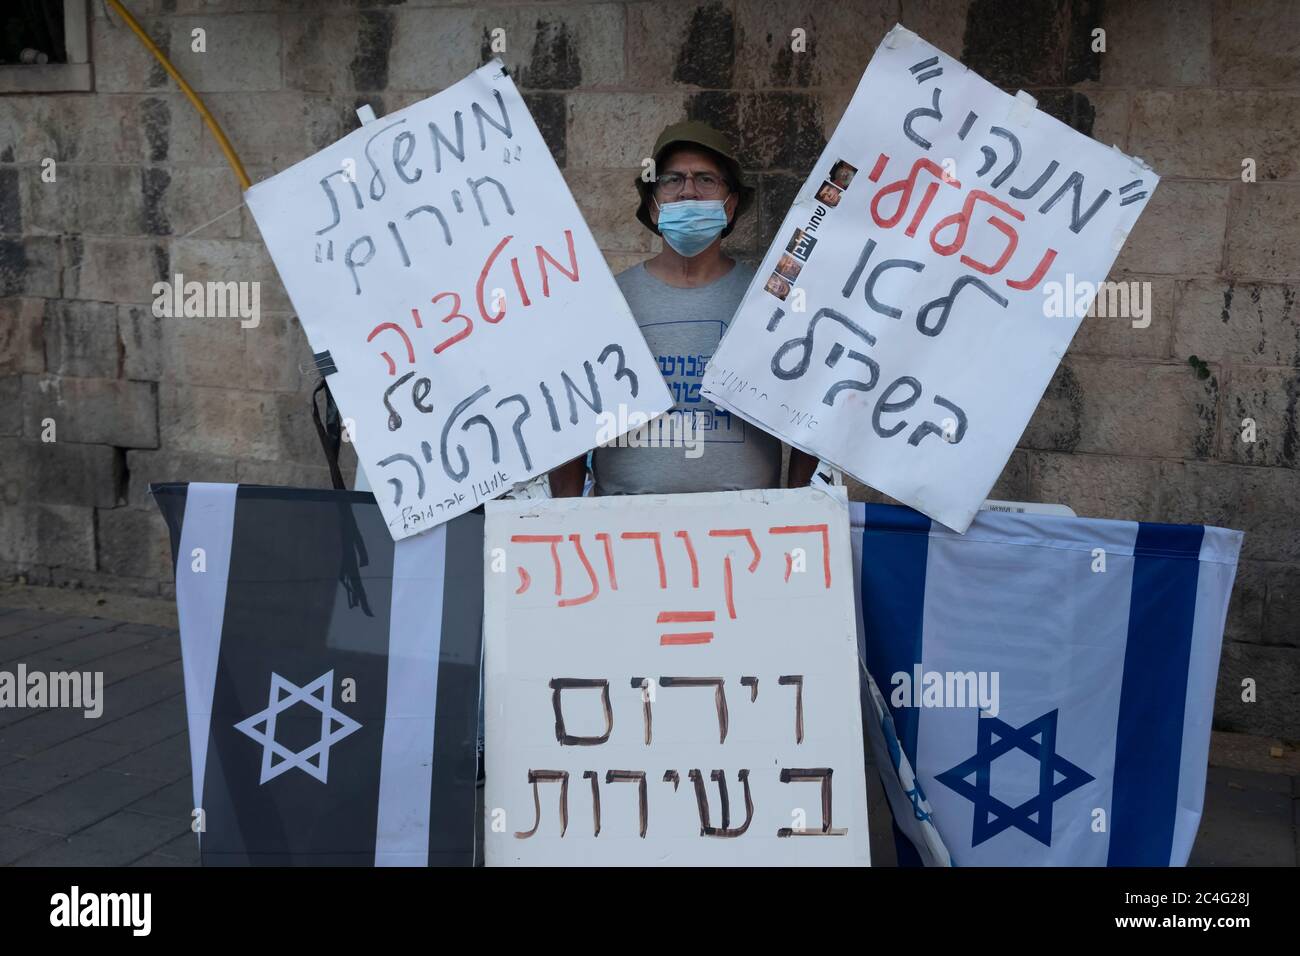 Jerusalem, ISRAEL 26th June 2020: A demonstrator holds placards with criticism quotes as hundreds of supporters of the so called Black Flag anti-corruption movement demonstrated outside the official residence of Prime Minister Benjamin Netanyahu, demanding he resign in light of the corruption indictments against him in Jerusalem, Israel. Credit: Eddie Gerald/Alamy Live News Stock Photo